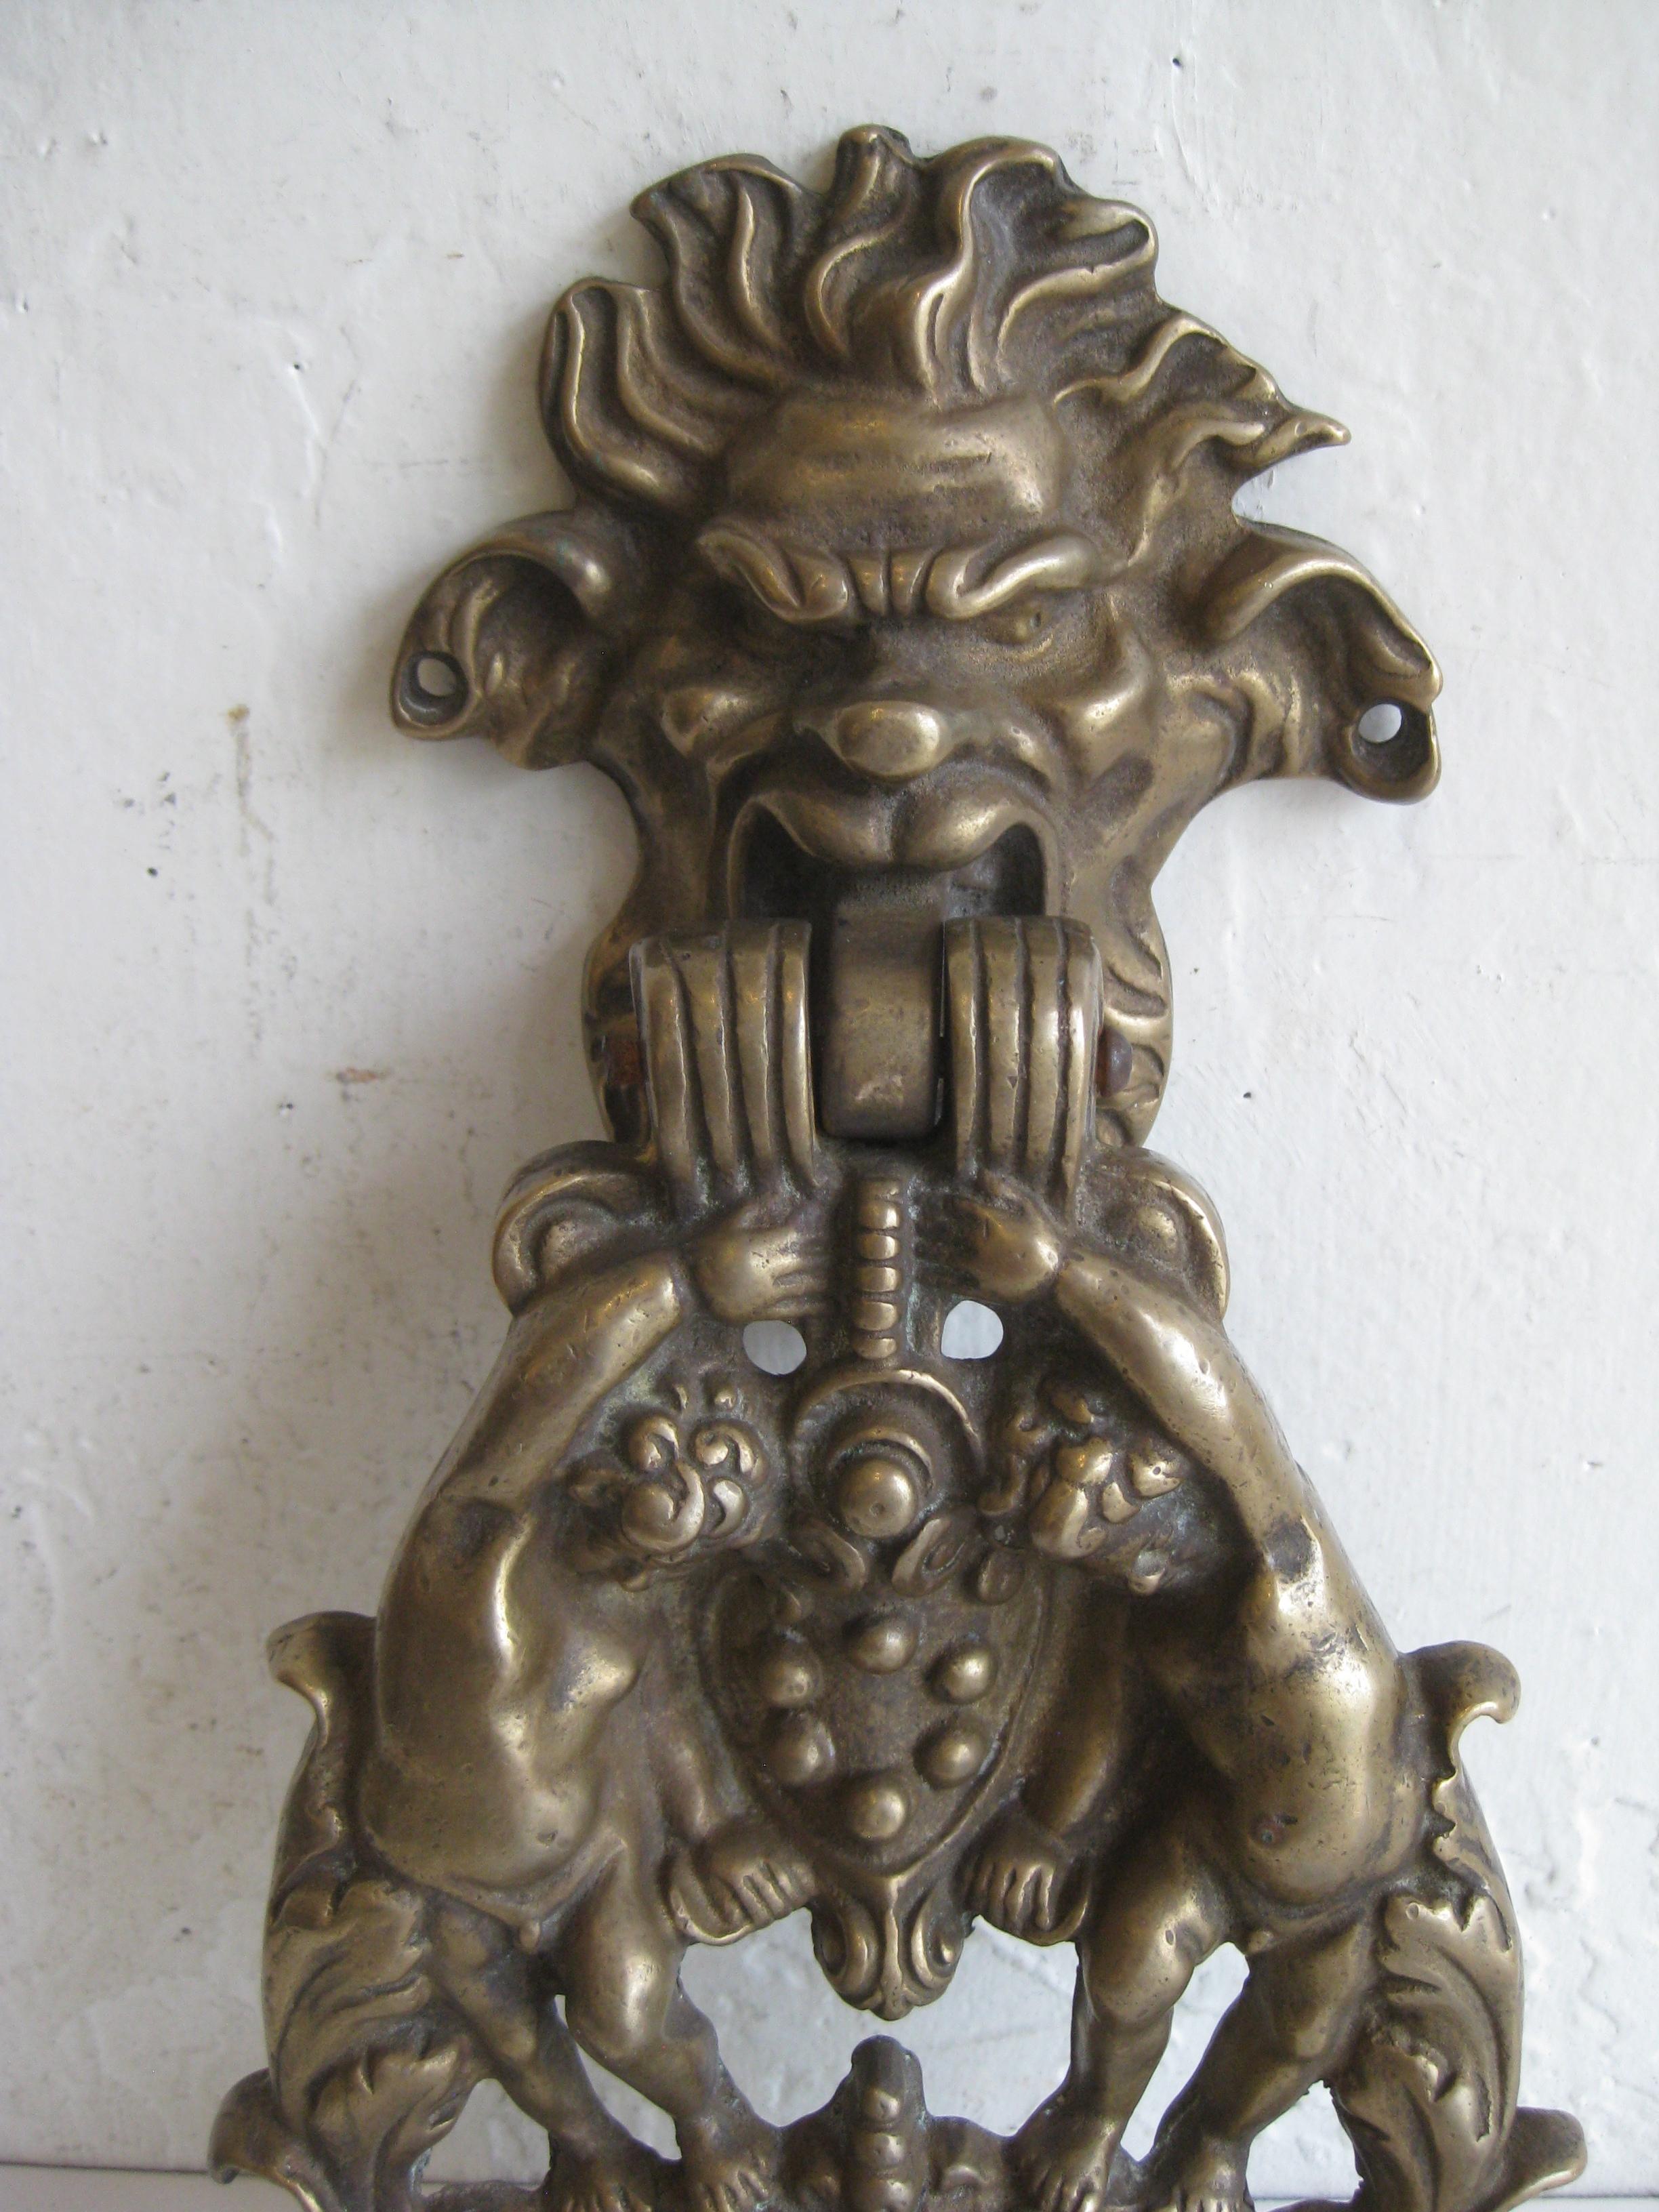 Very unique antique cast brass Italian/French Gothic cast brass door knocker. Great design and form featuring two cherubs and a grotesque gargoyle. Wonderful patina and can be polished if desired. Works great and is in very nice original condition.